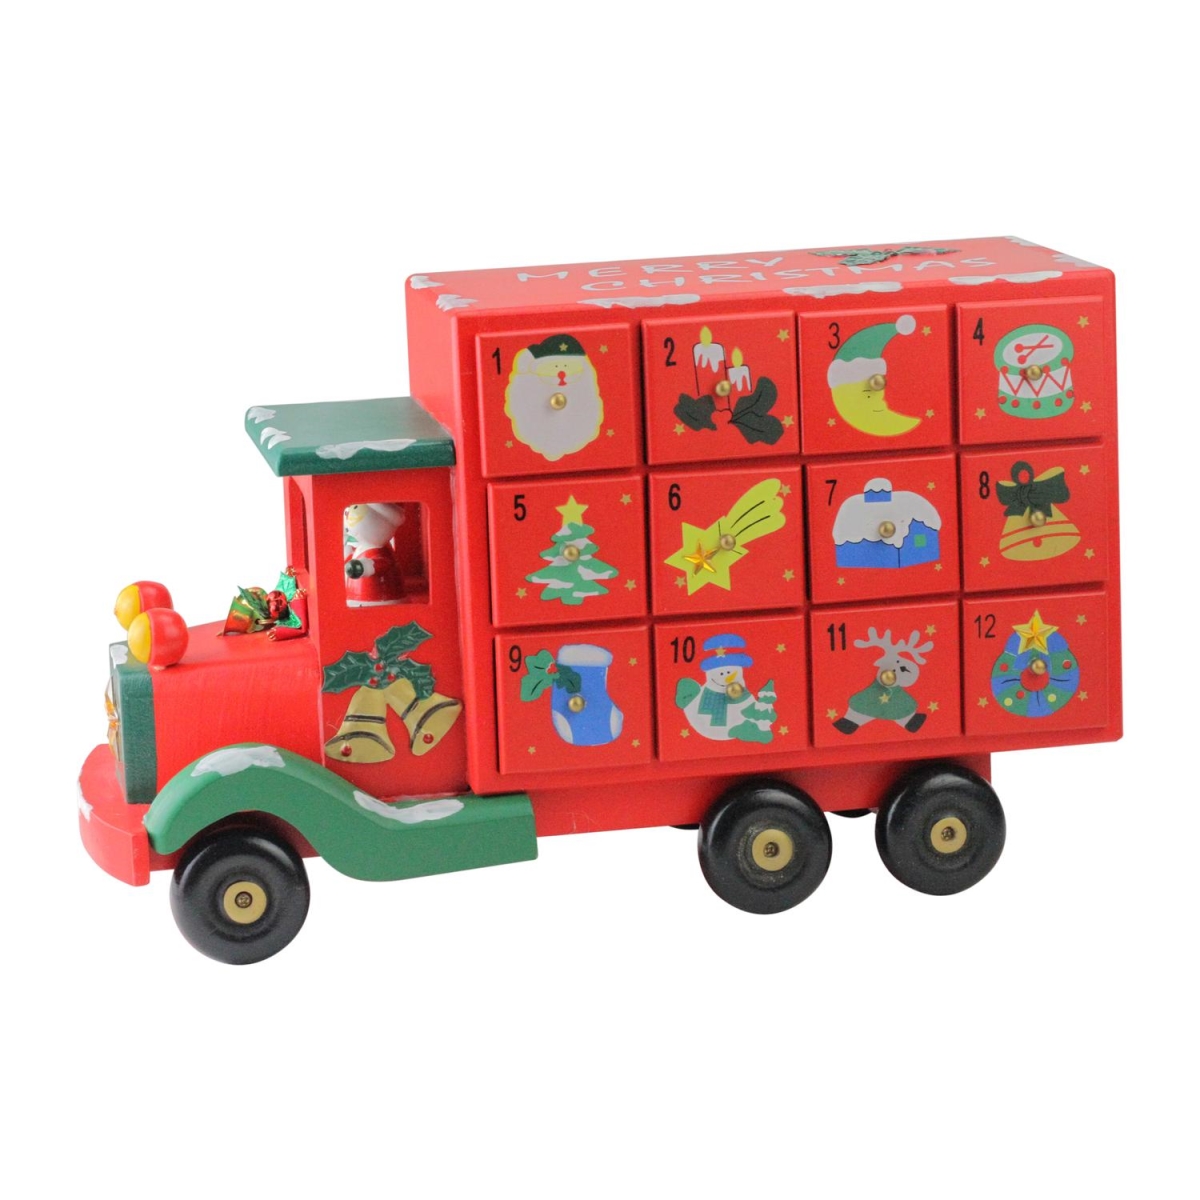 Picture of Northlight 32634948 14 in. Childrens Advent Calendar Red Storage Truck Christmas Decoration